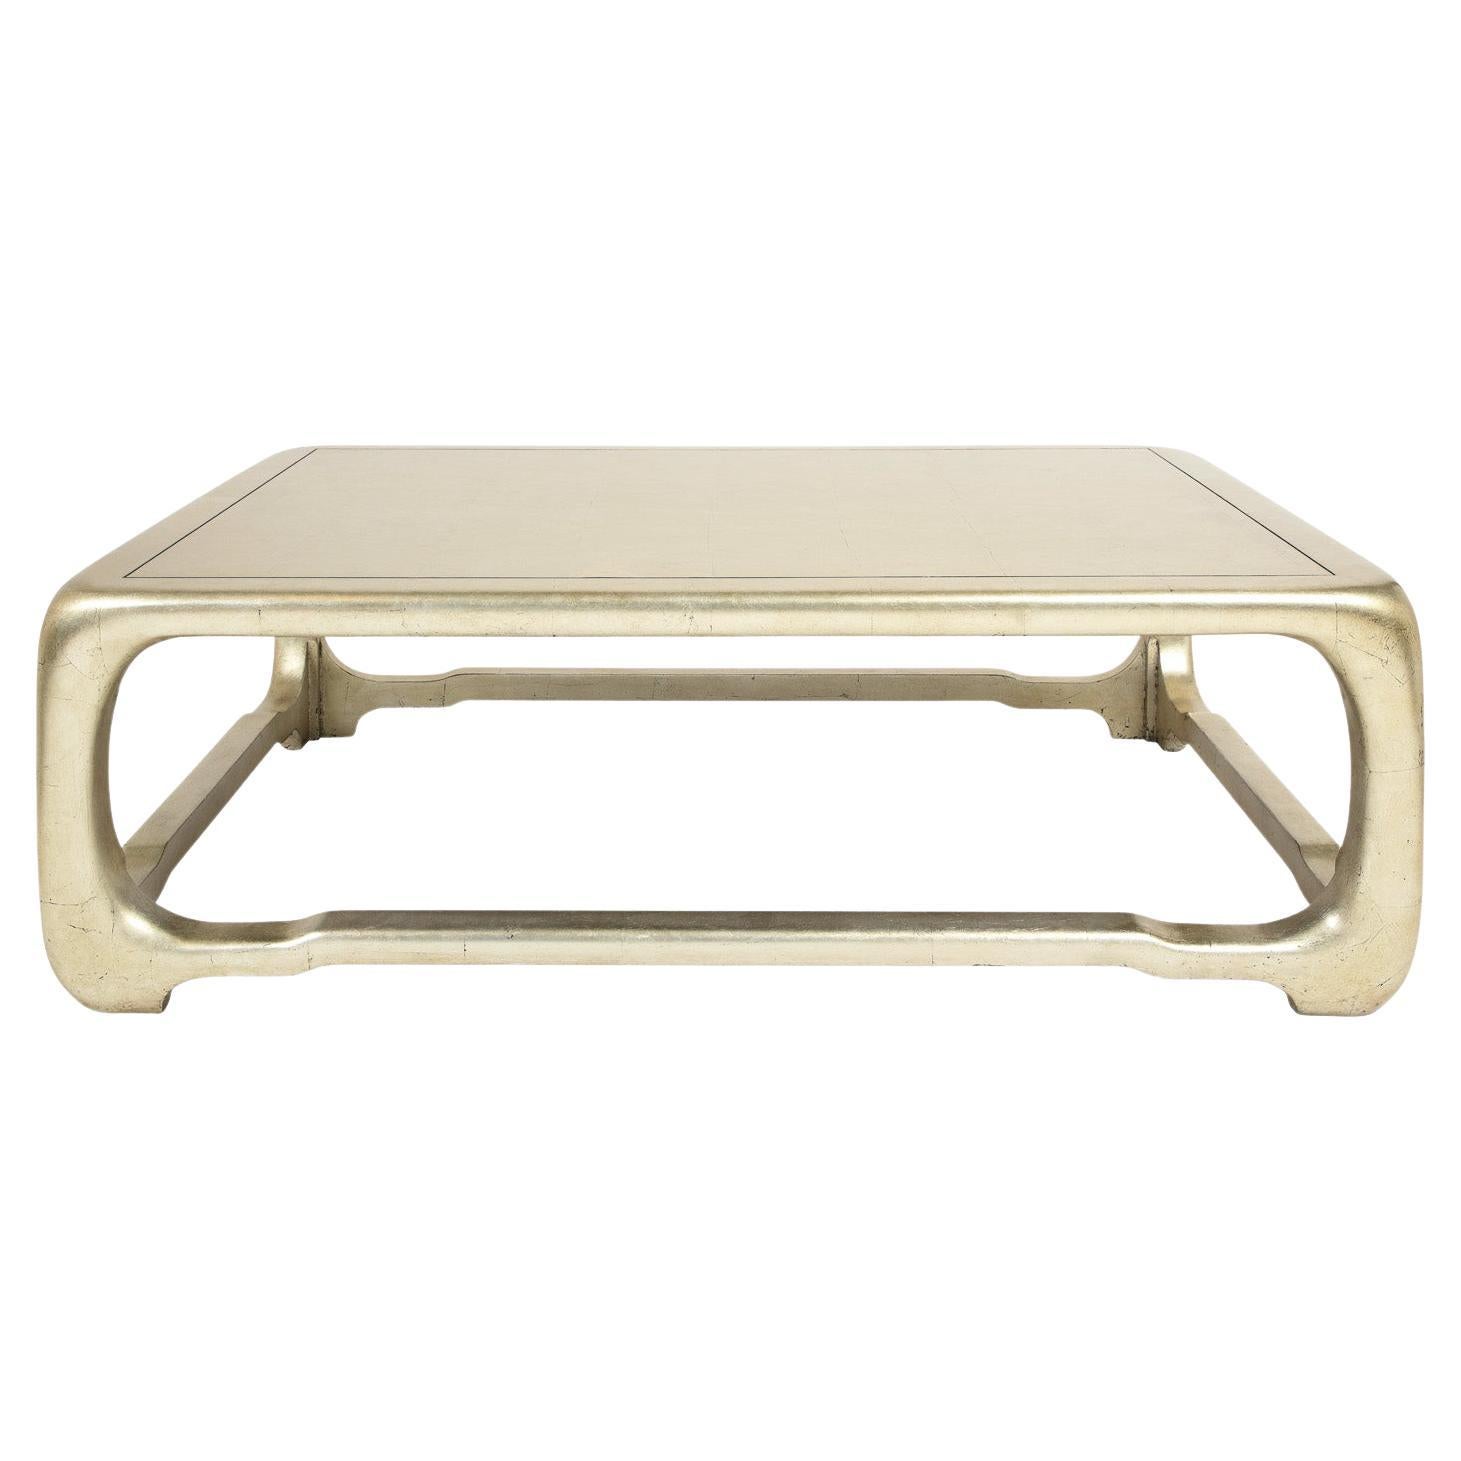 Karl Springer "Chinese Cube Style Coffee Table" in Platinum Leaf 1980s For Sale